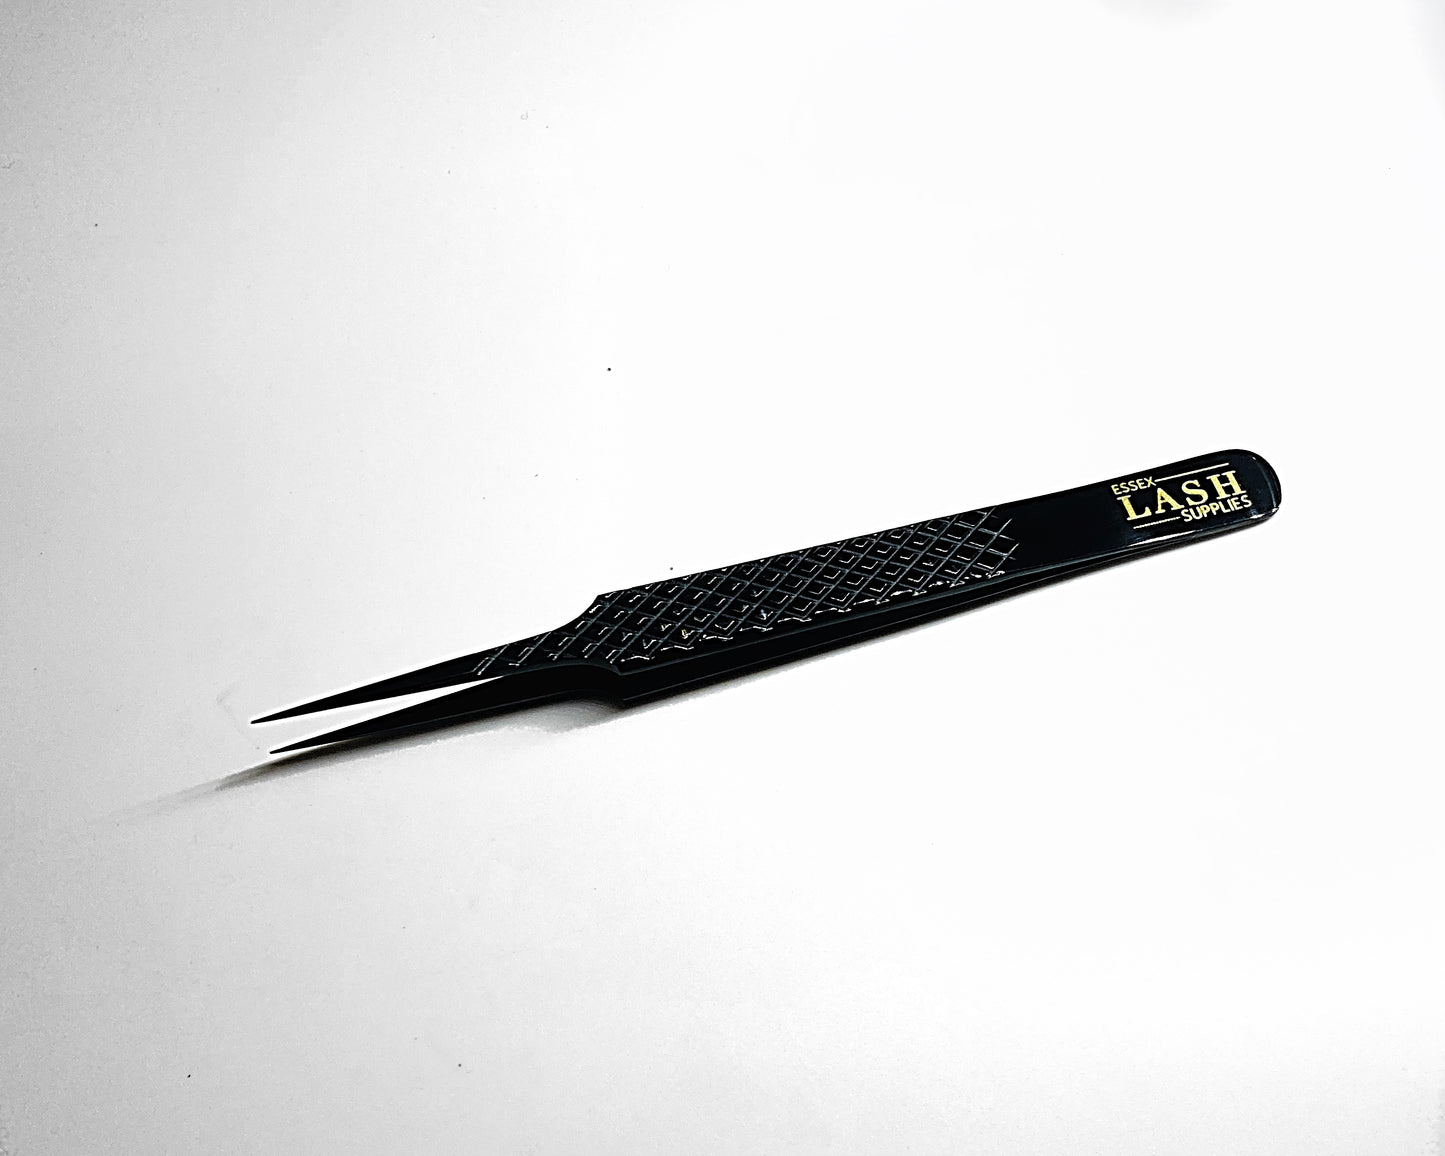 Professsional straight eyelash extension Tweezers, for isolation and classic pick up.